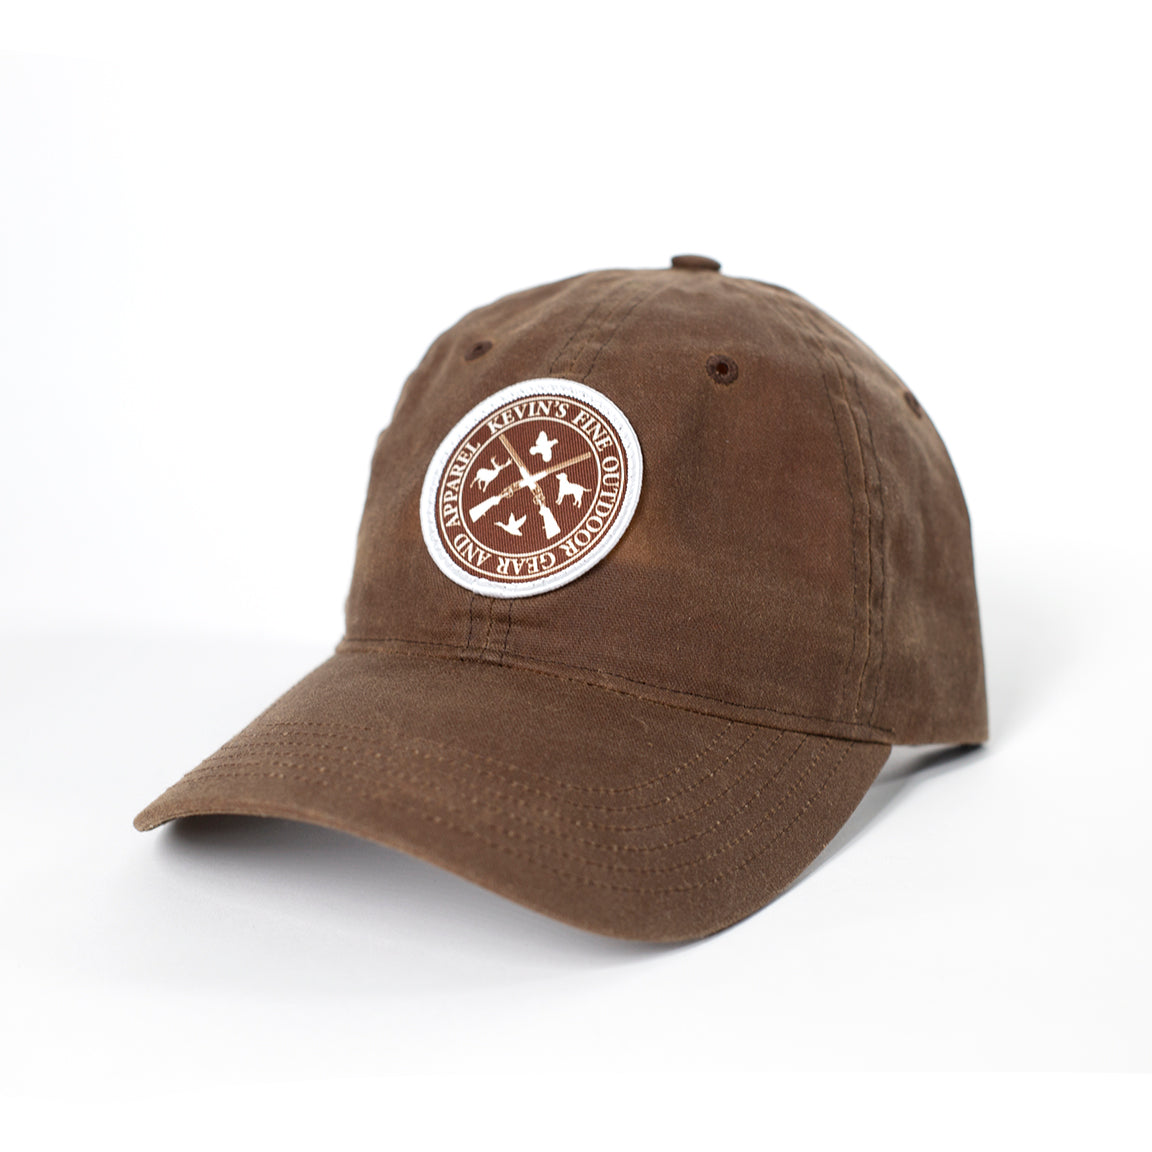 Kevin's Old Favorite All Terrain Cap-Men's Accessories-BUCK WAXED CLOTH-Kevin's Fine Outdoor Gear & Apparel